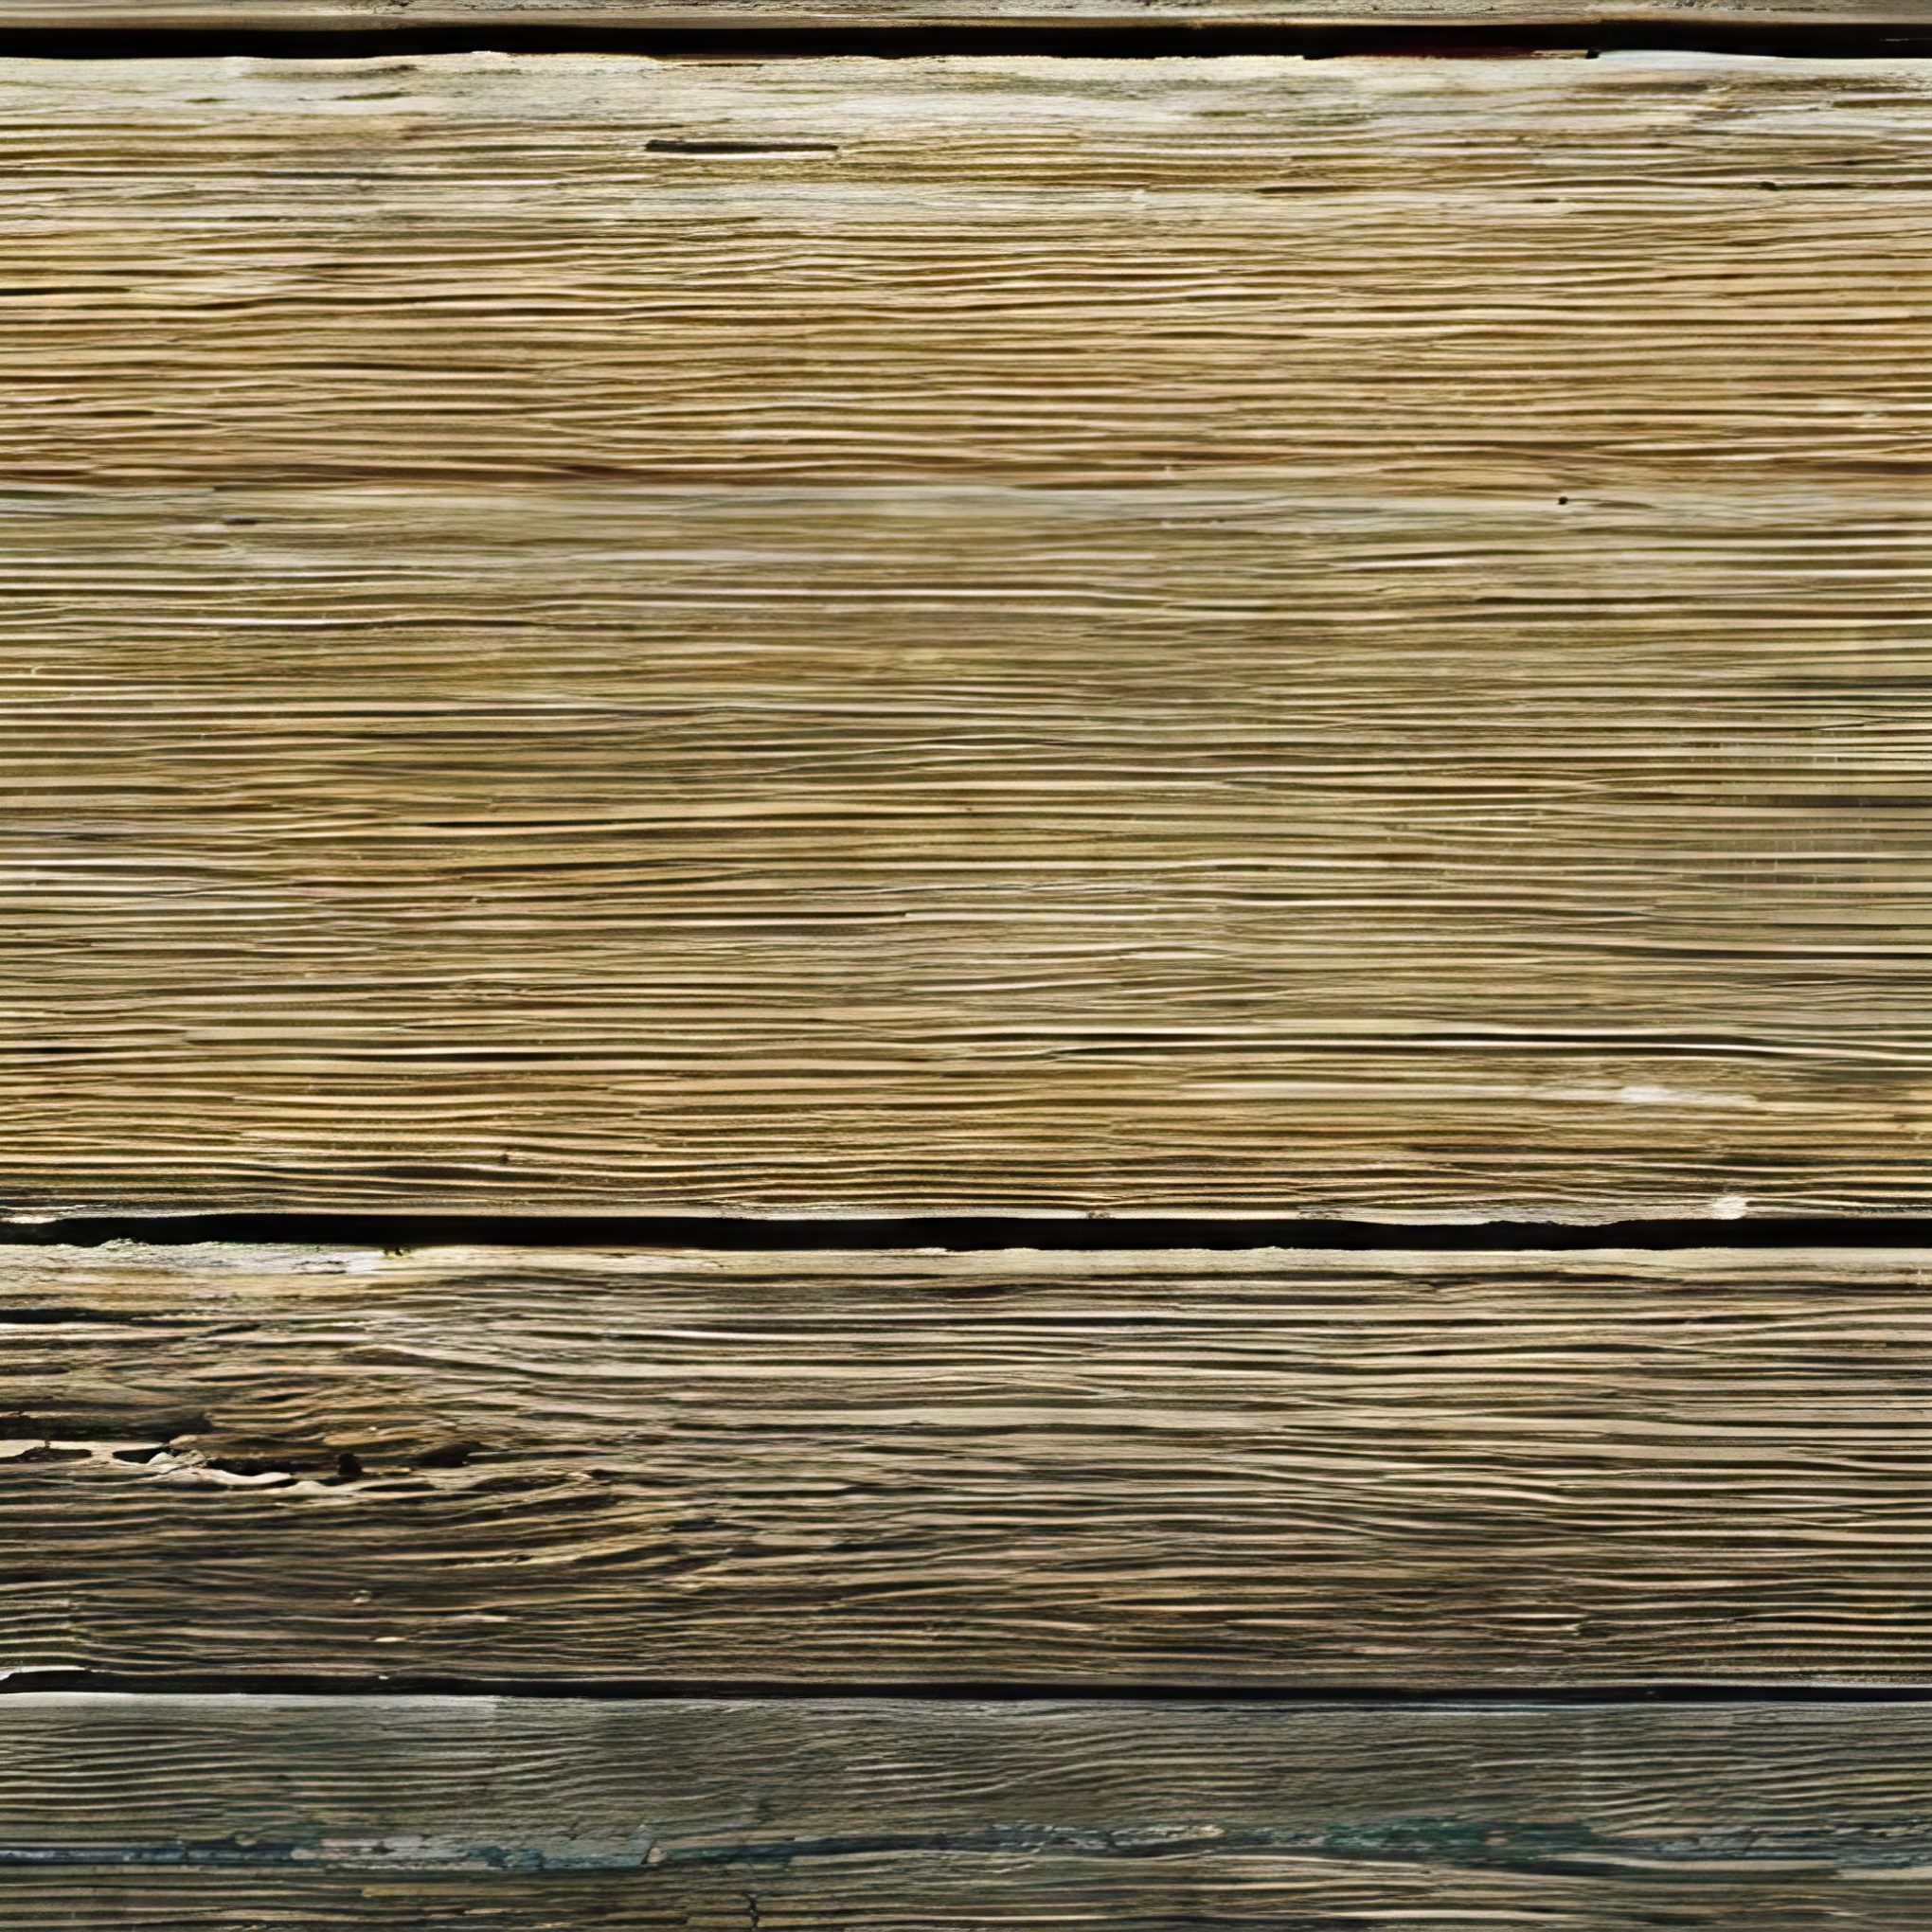 Close up of old wooden Planks Free Image